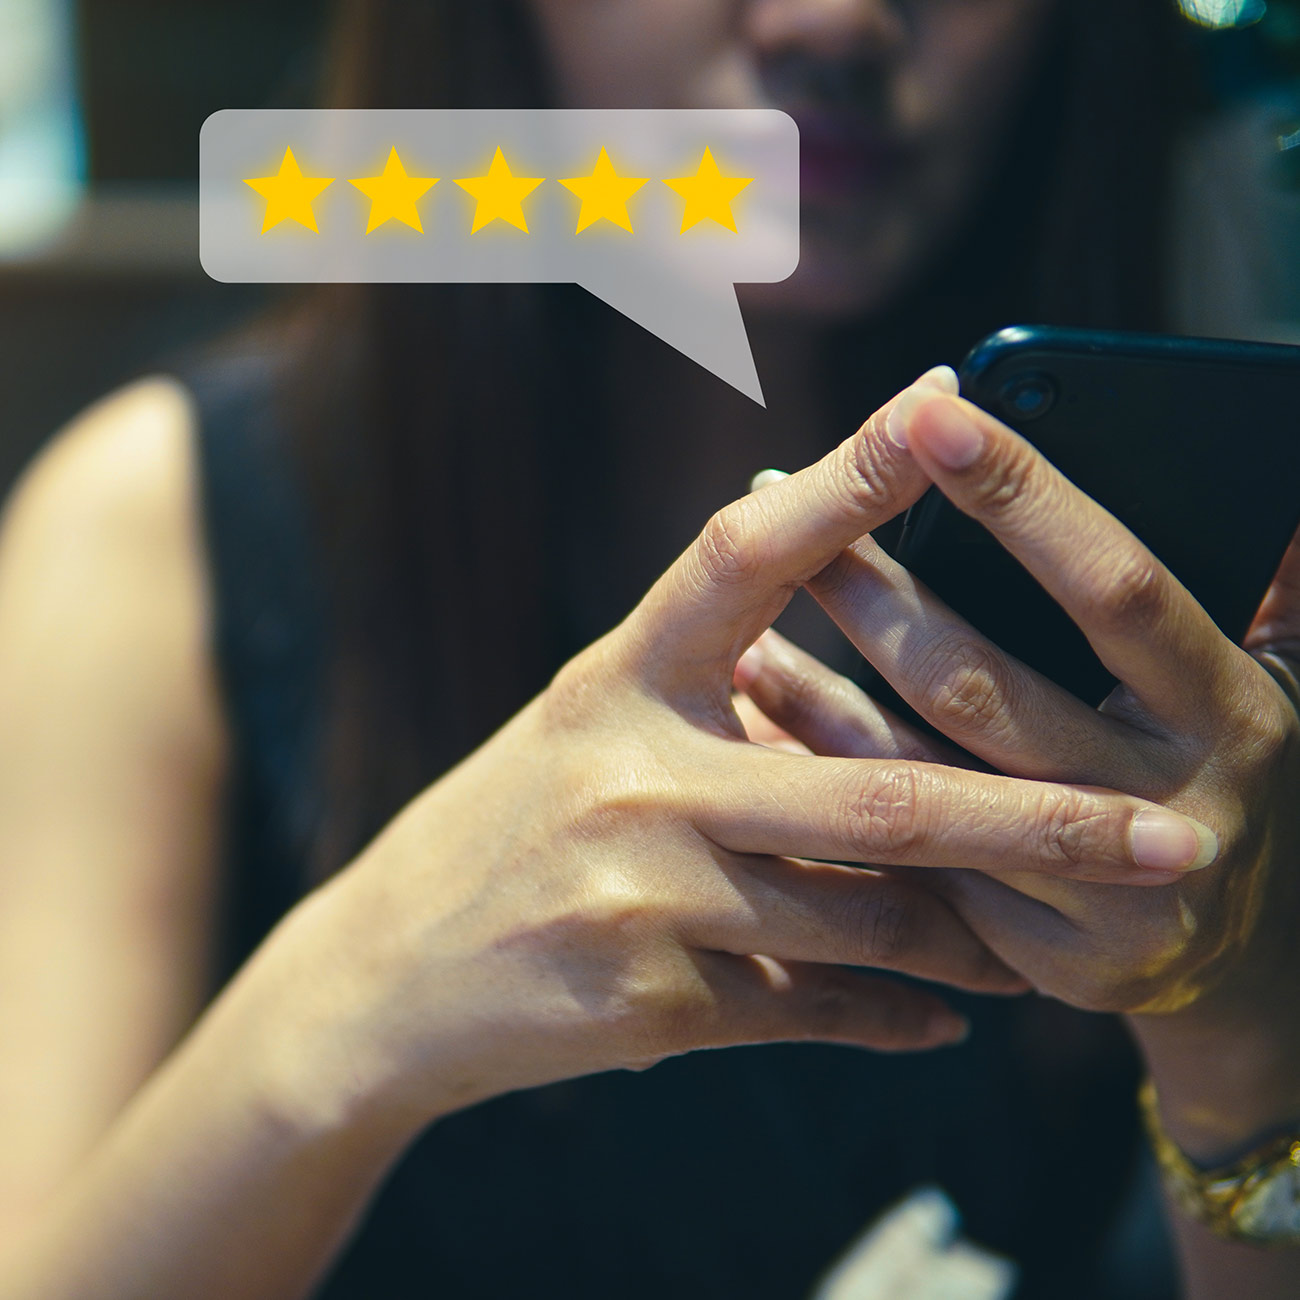 customer-review-good-rating-people-use